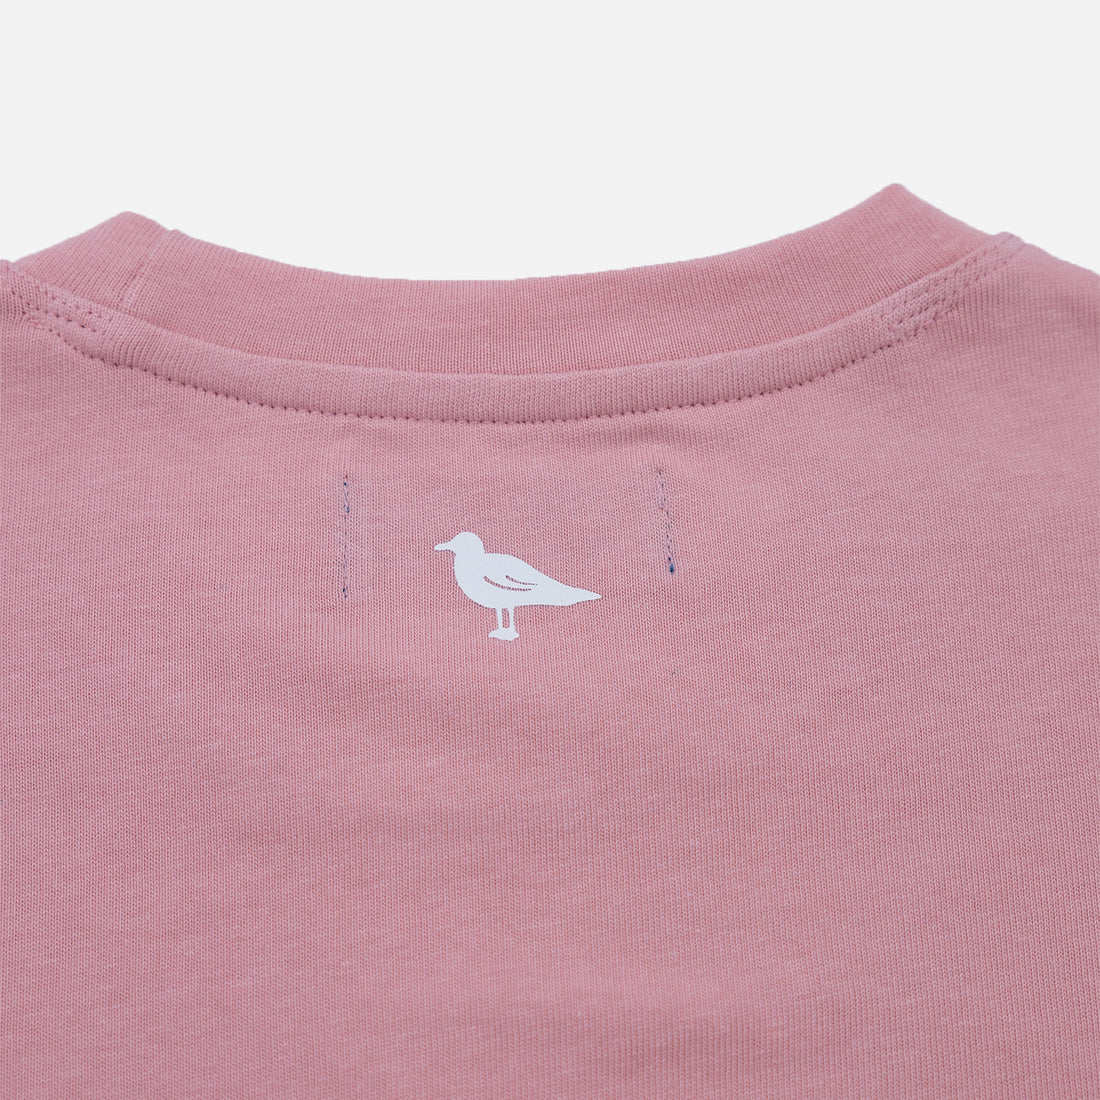 Mystic Embroidered Heavyweight Tonal T-Shirt in Dusty Rose